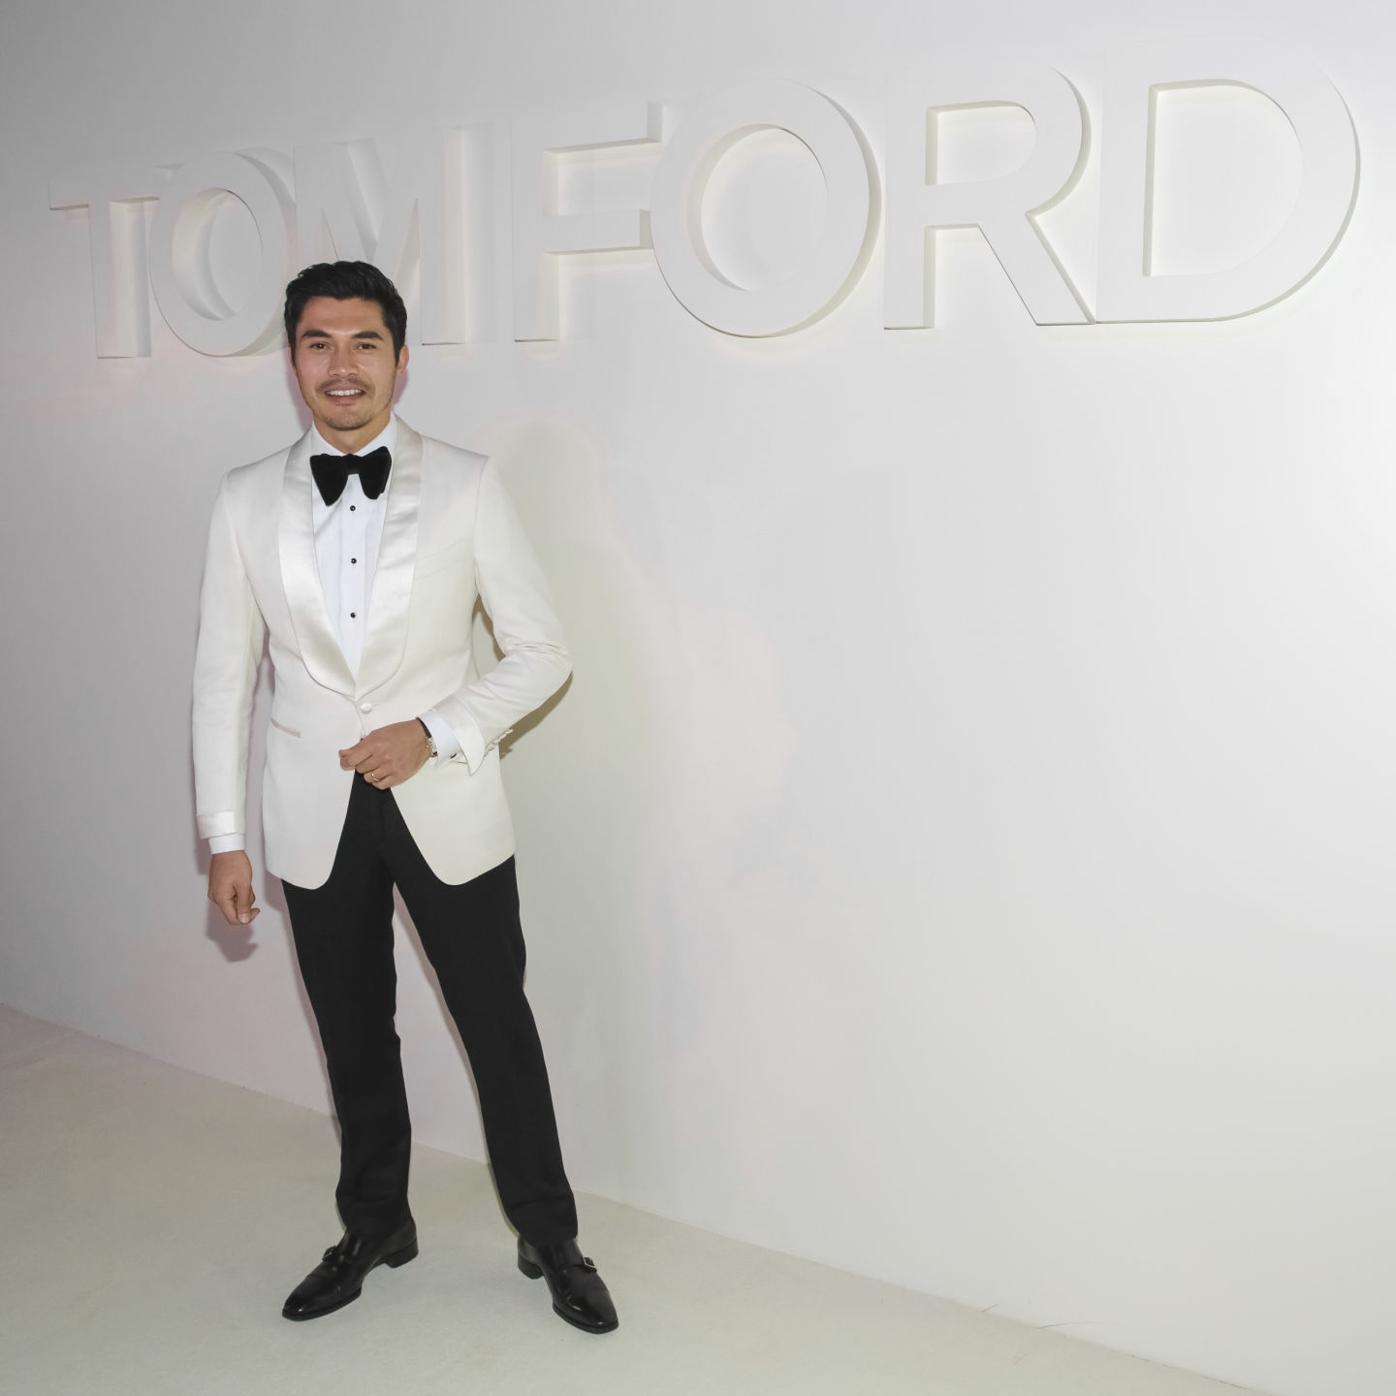 Tom Ford's Superfly Runway Show Draws Sports Celebs, Young Studs